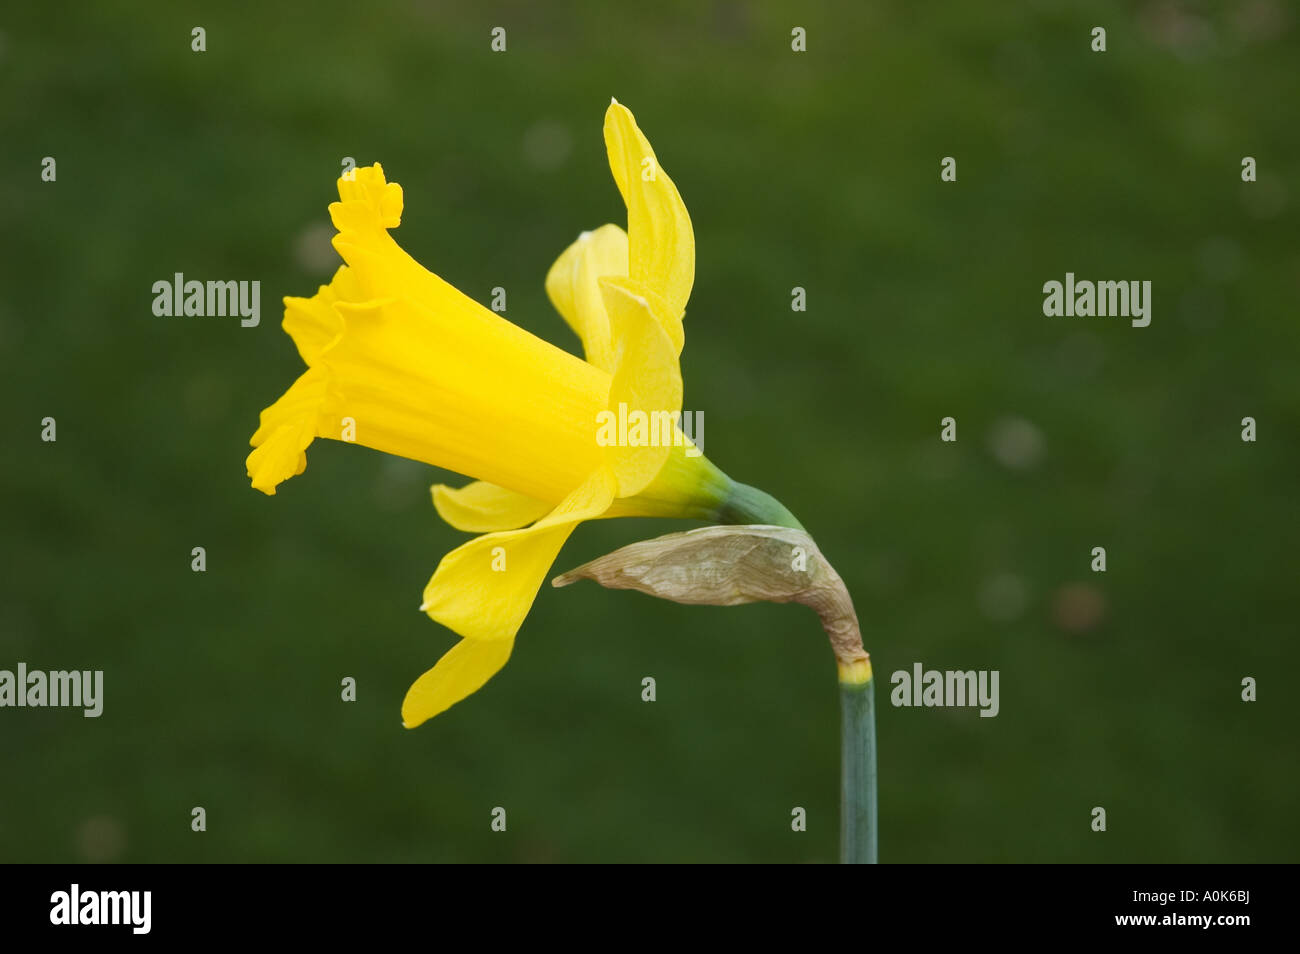 Yellow daffodil king alfred Narcissus side view Stock Photo